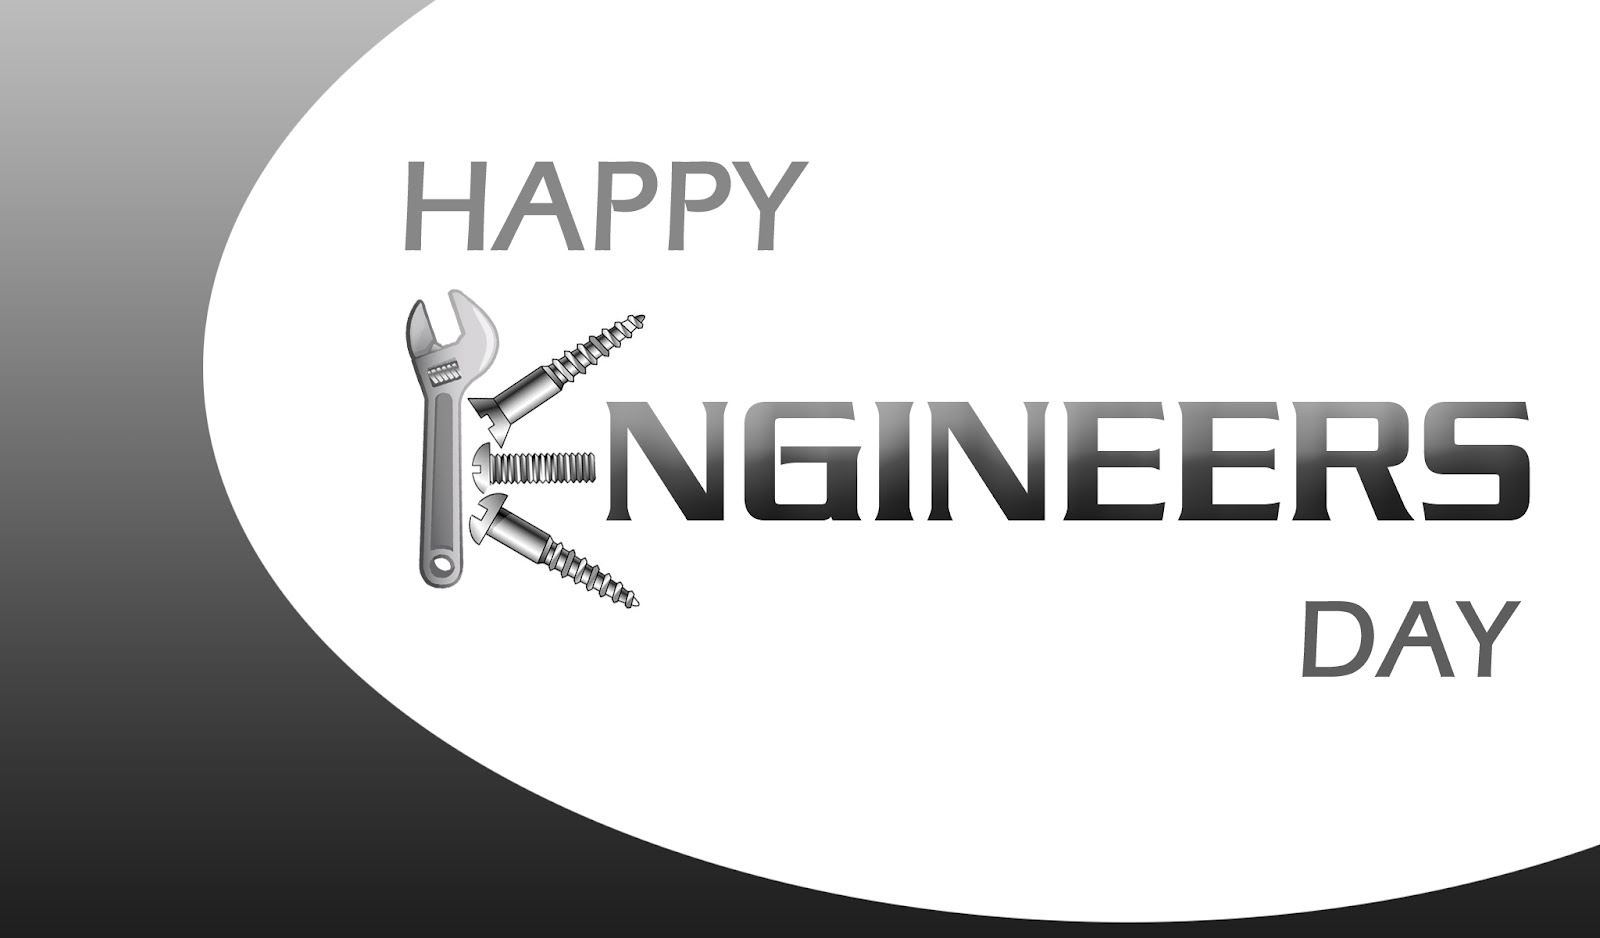 Happy Engineers Day Wishes, SMS, Messages, Pictures, Wallpapers, Images